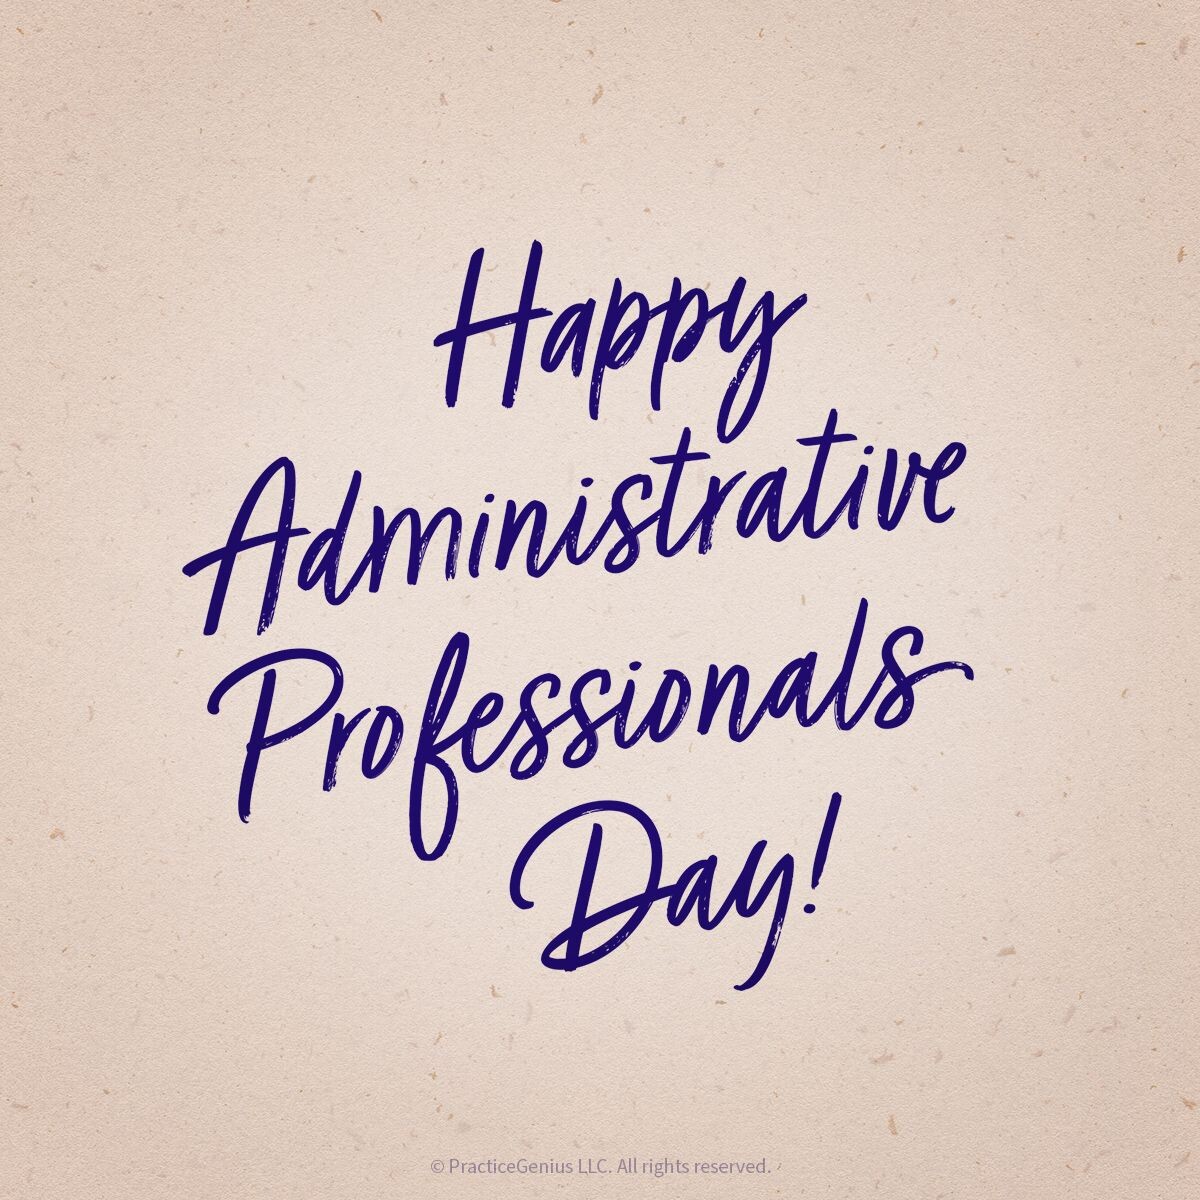 Happy Administrative Professionals Day!  Today, we celebrate Debra and Tanya, we could do what we do without you!!  Hope you have a great day, keep smiling!  #merrifieldorthodontics #merrifieldorthodonticsteam #mosmiles #mosmilesteam #happyadminday #debraandtanya #thebestteam....